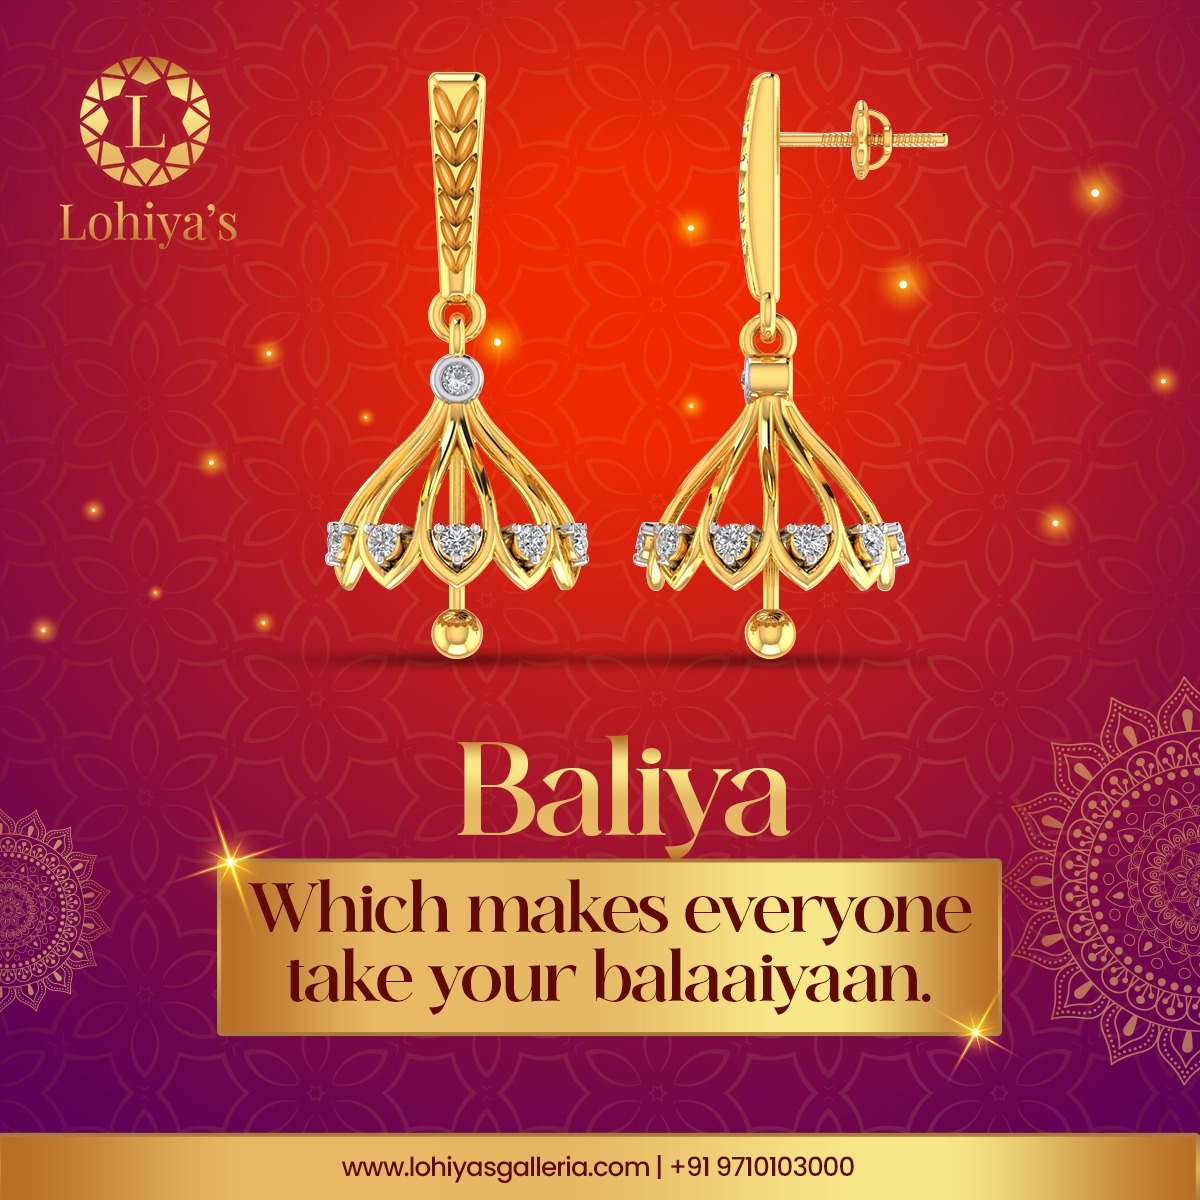 Shop something which makes your candid capture look even more stunning. 
Grab this Earring from Lohiyas Galleria for your next big occasion.  

#goldph #goldenpup #clothing #shopper #polymerclay #shoppaholic #shopingonline #goldenlovers #jewelry_making #wahrania